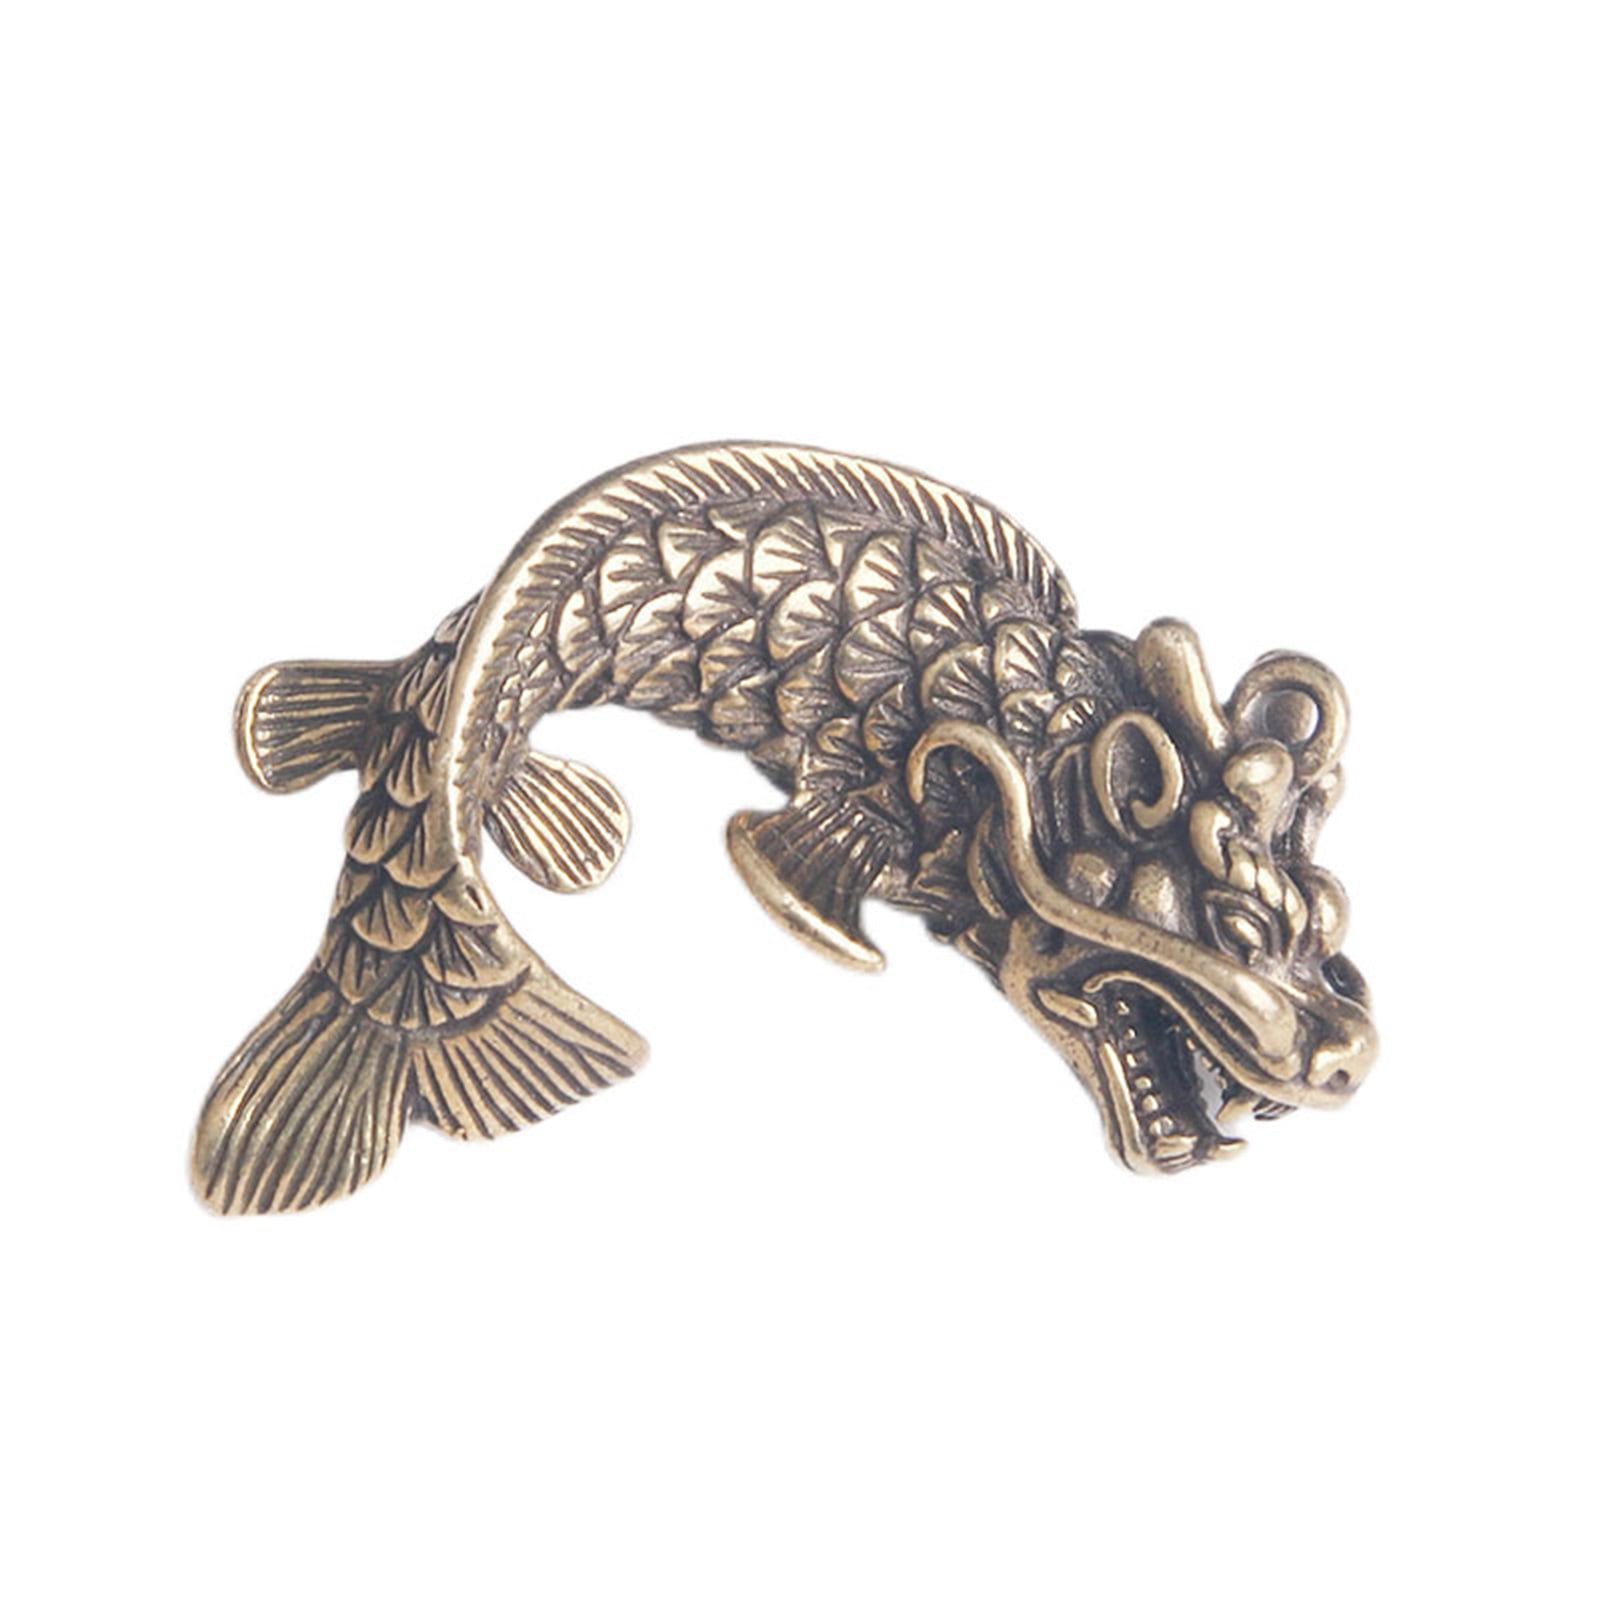 Sophisticated Artistic Charm Fish Frogued Home Copper Ornament Vividly 3D for Engraved Texture Dragon Key